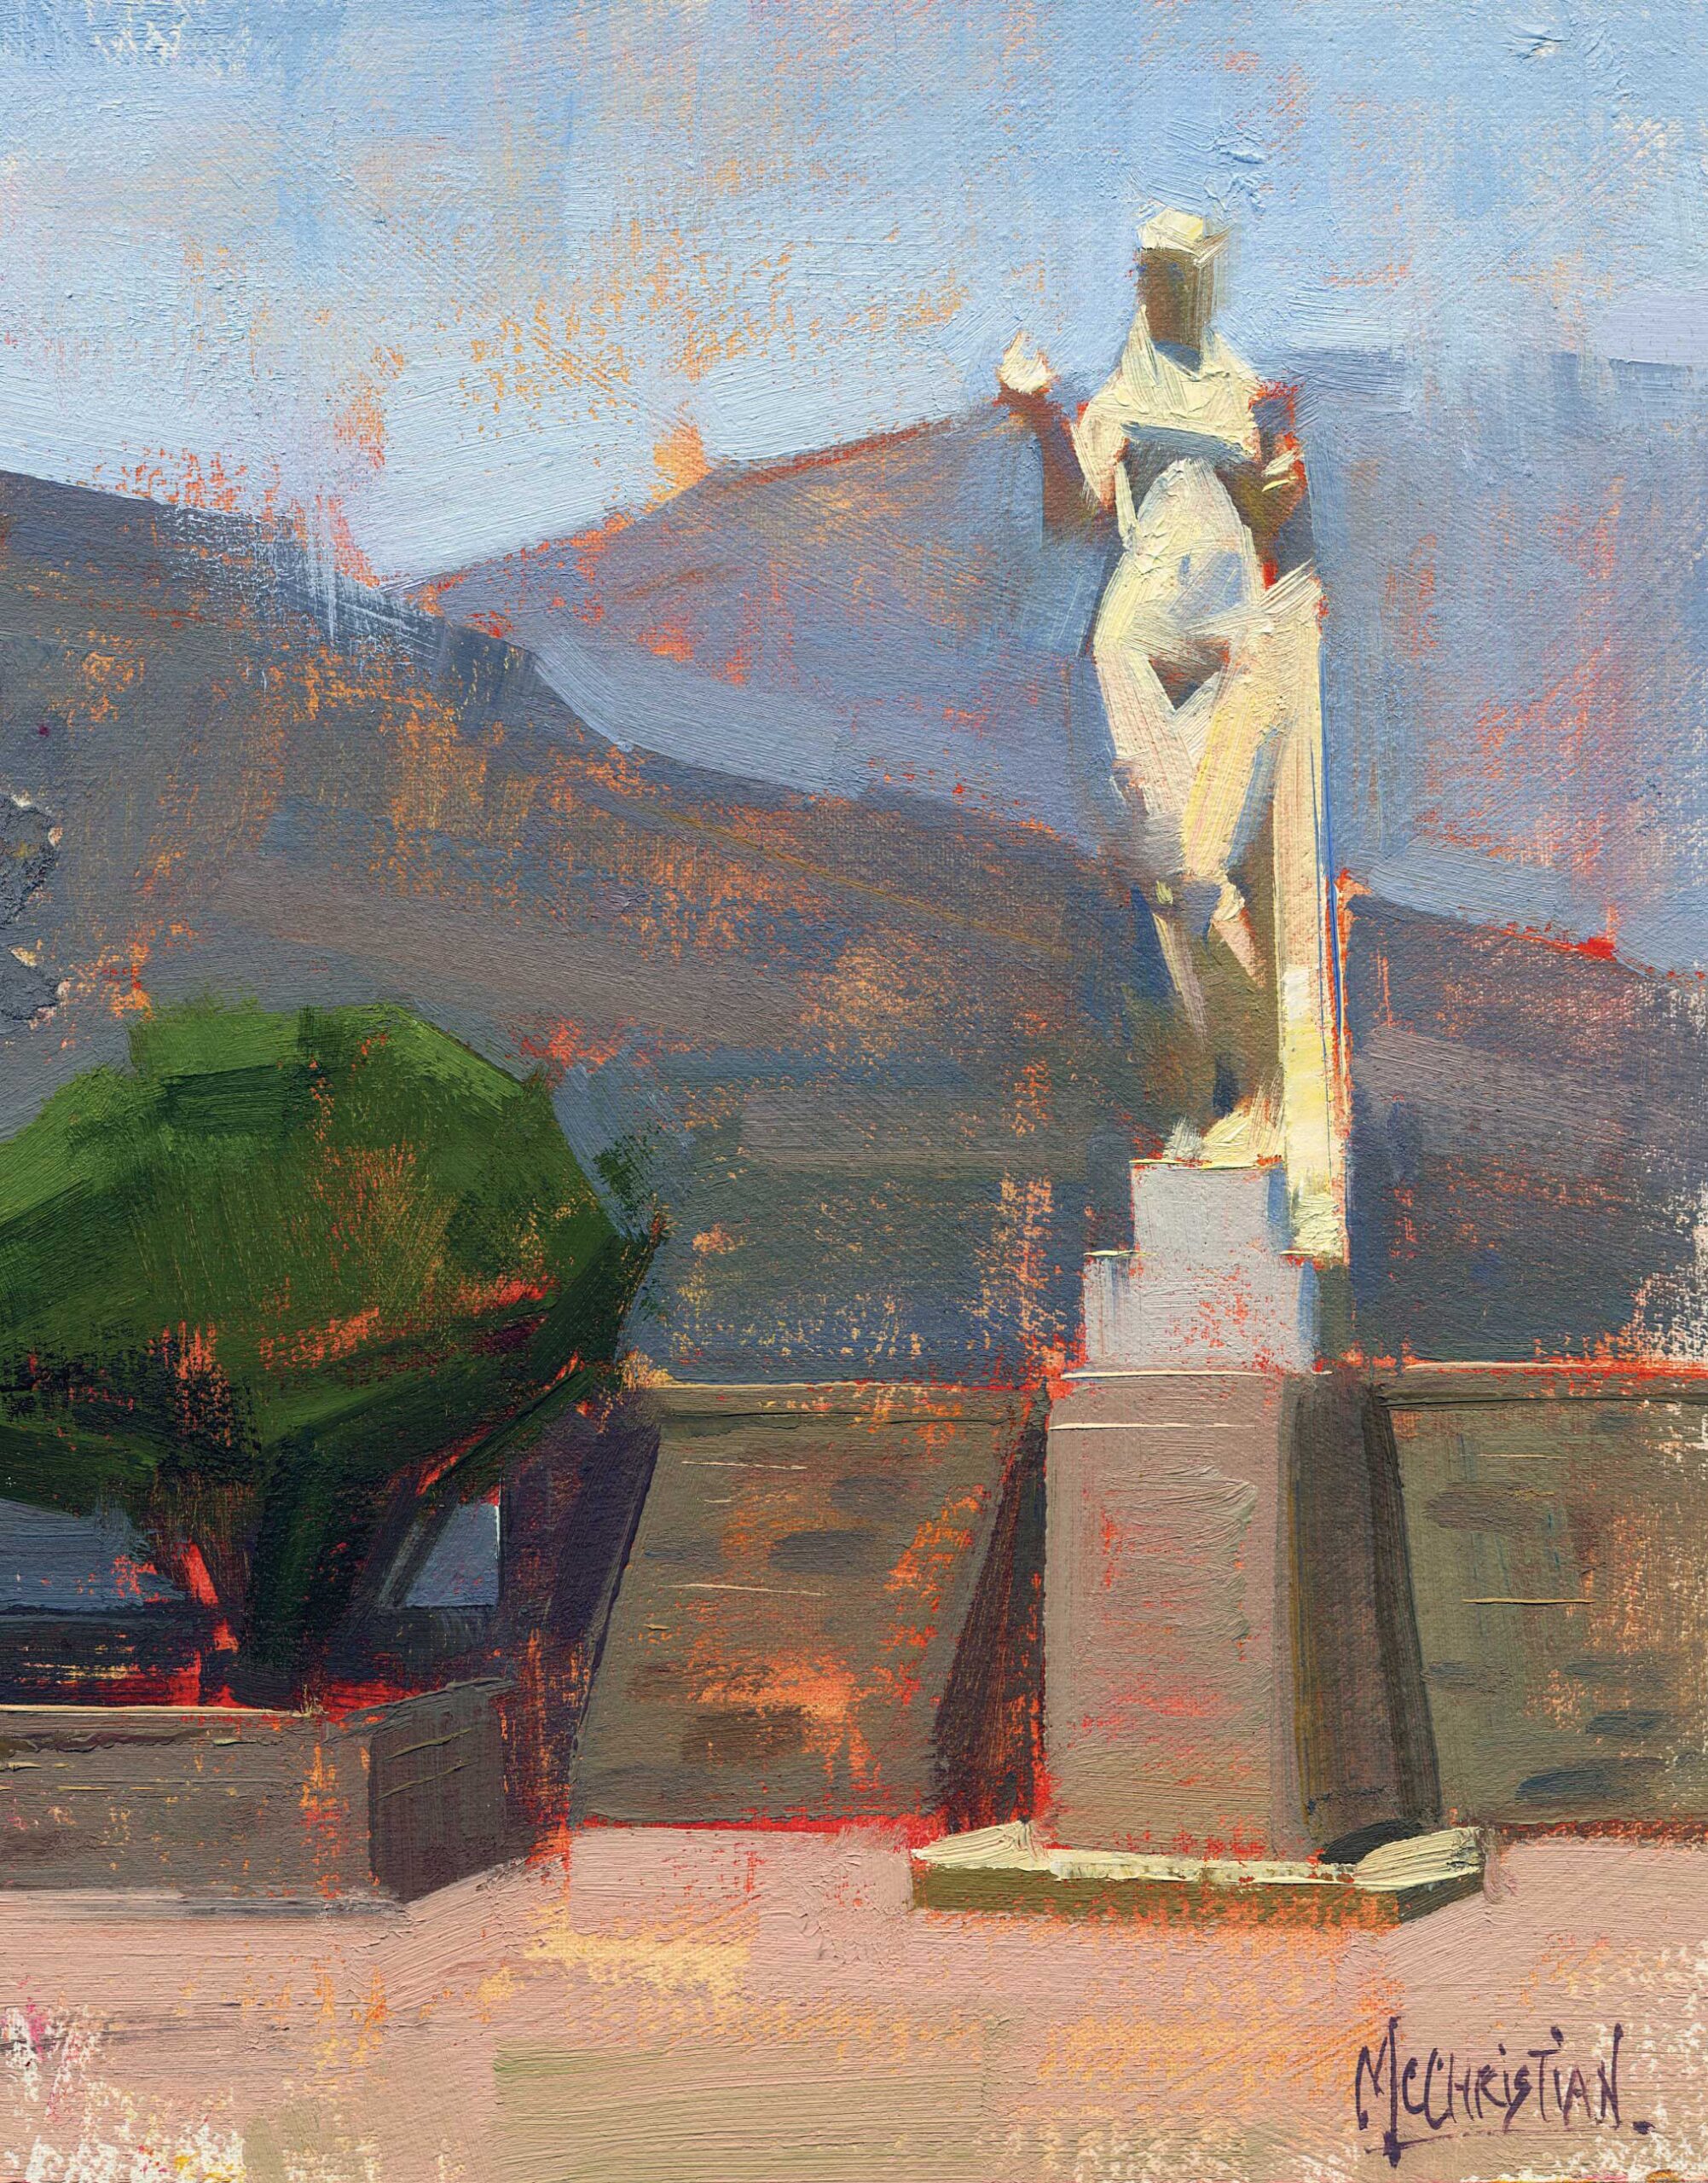 Landscape painting with a statue - Jennifer McChristian, “Keeper of Prayers,” 2017, oil on panel, 9 x 7 in., Private collection, Plein air. Note how the artist depicted the statue in with contrast and color that stressed its inherent beauty.